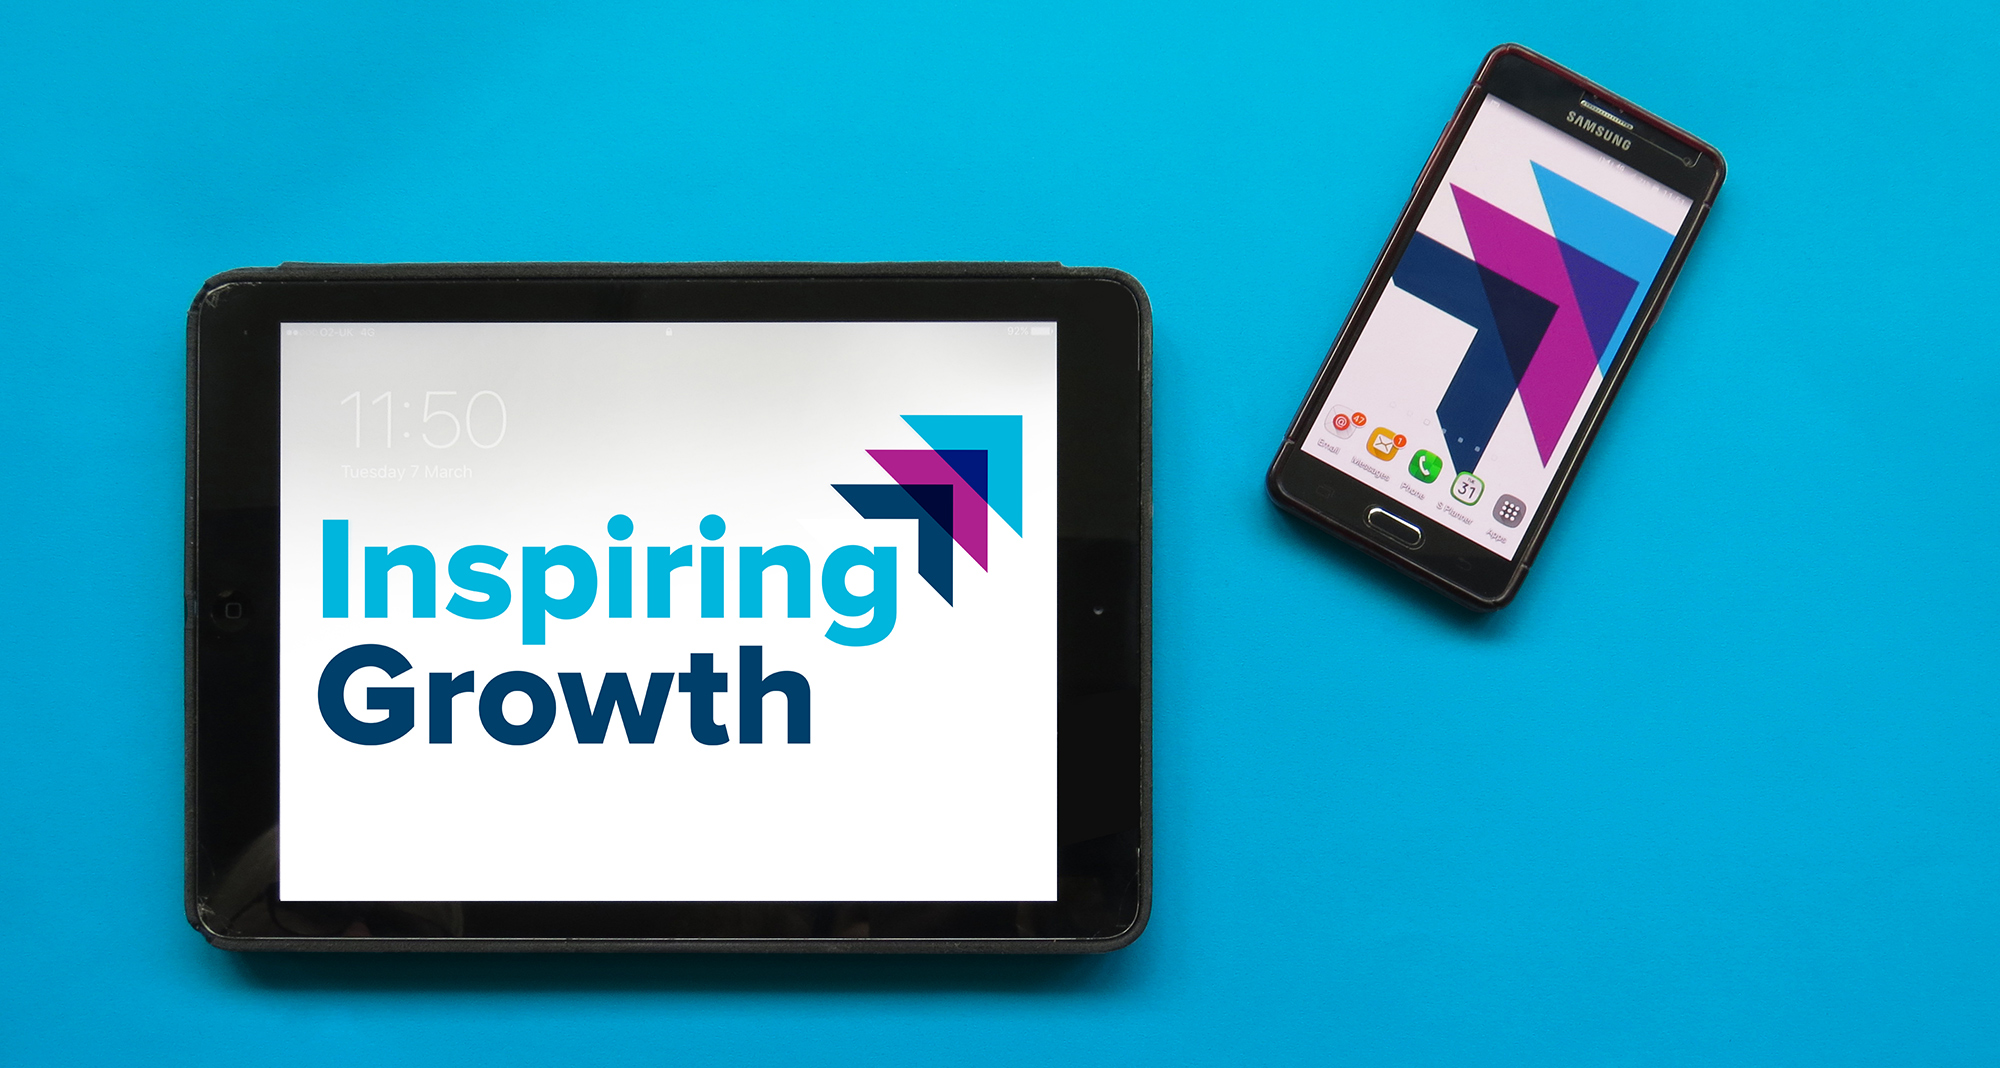 iPad and iPhone with Inspiring Growth Logo on the screen